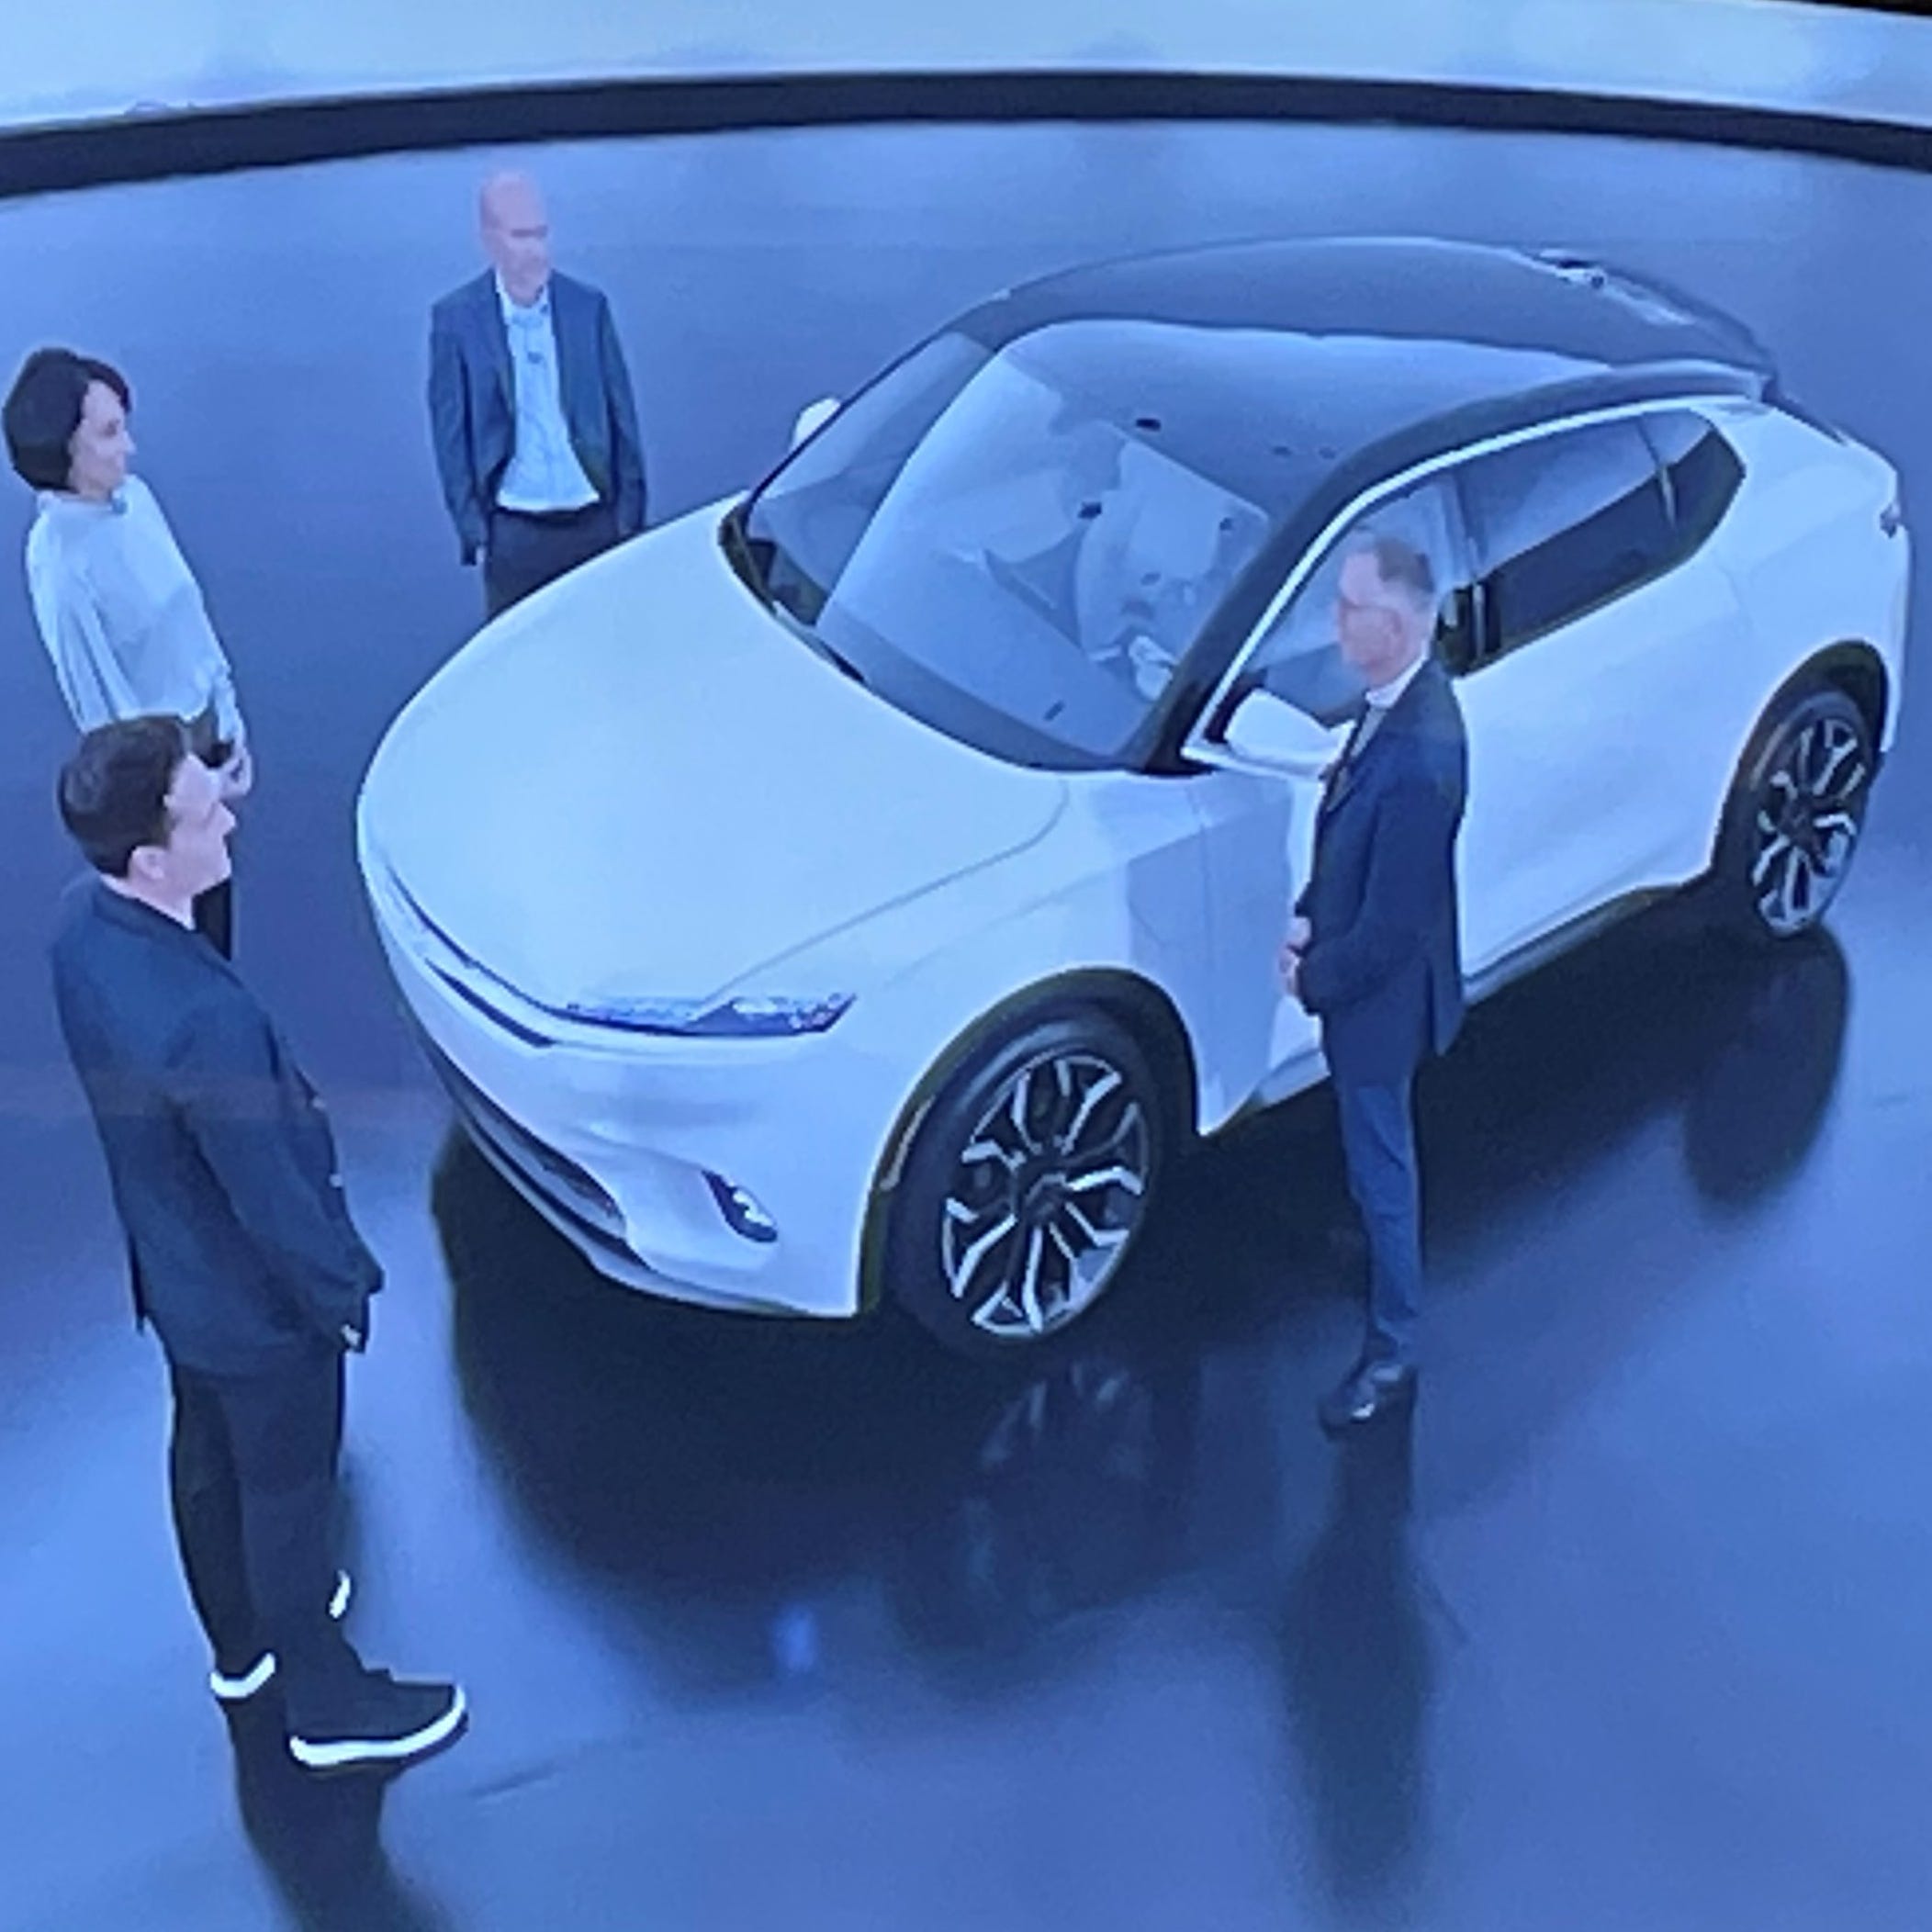 Stellantis CEO Carlos Tavares, right, in a video shown during the company's Software Day presentation in December, discusses the Airflow, a vehicle that could lead the next chapter for the Chrysler brand.